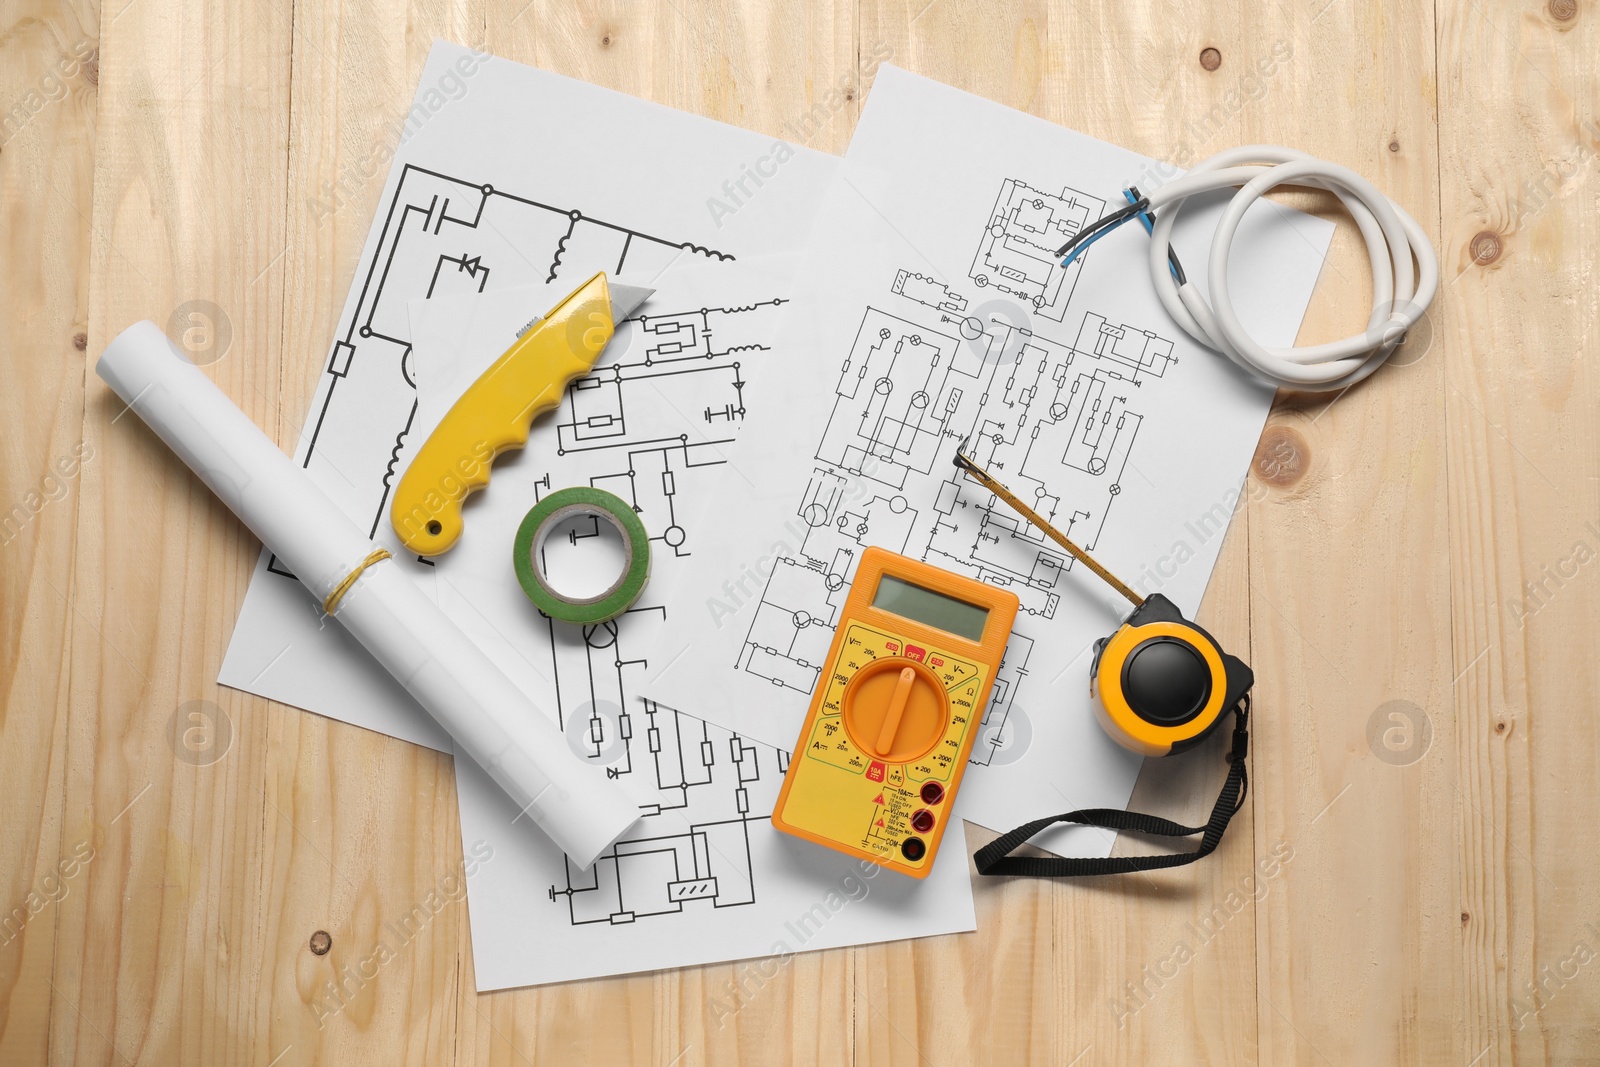 Photo of Wiring diagrams, wires and digital multimeter on wooden table, flat lay